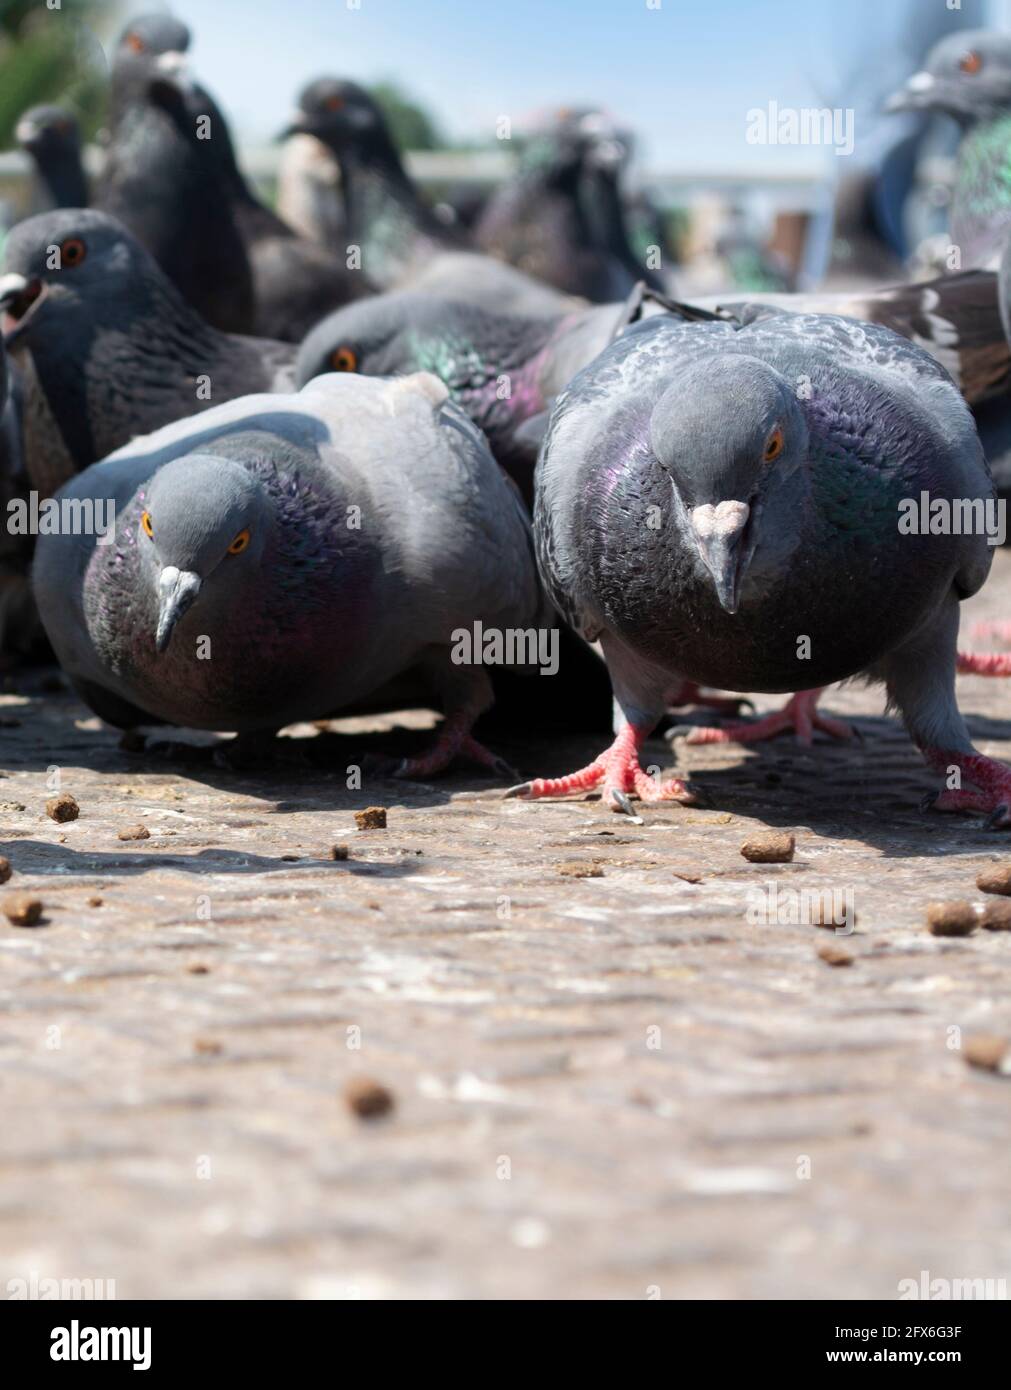 Two pigeons, gazing eyes on food, prepare to vie for food on the ground. Stock Photo